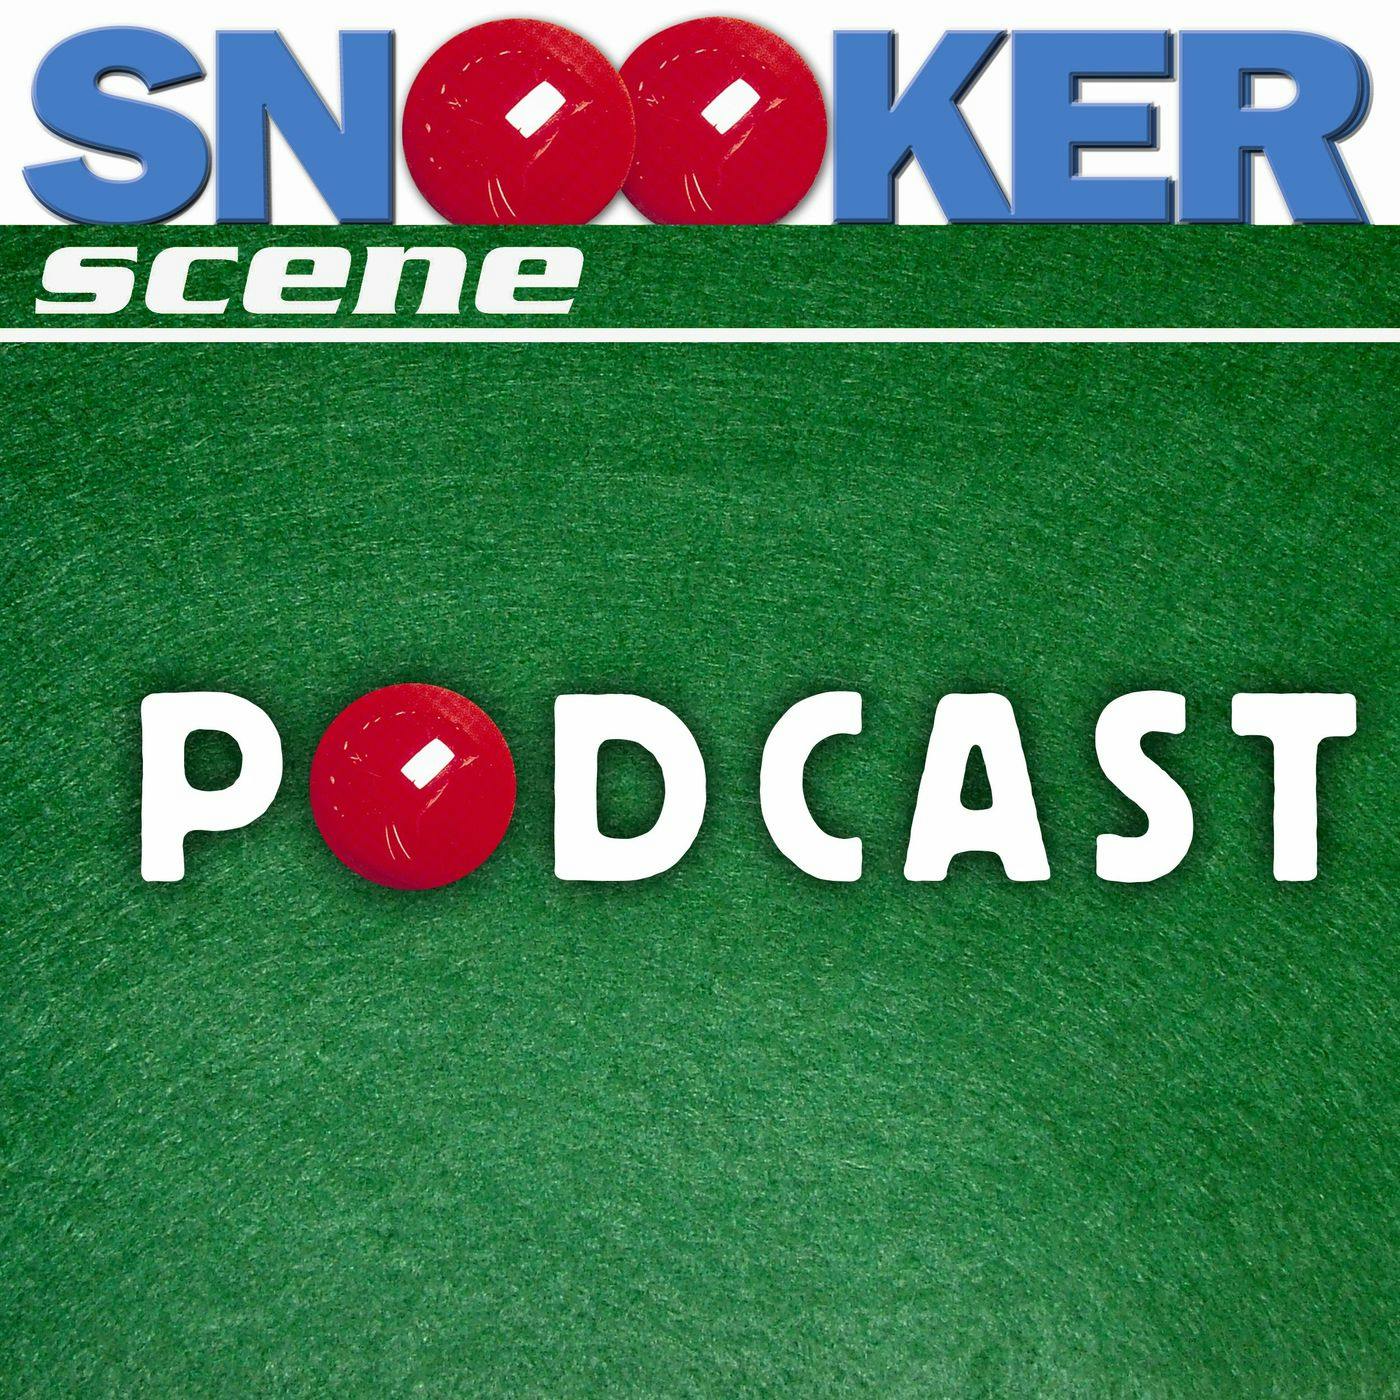 Snooker Scene Podcast episode 101 - Greatest Matches (Crucible not included)